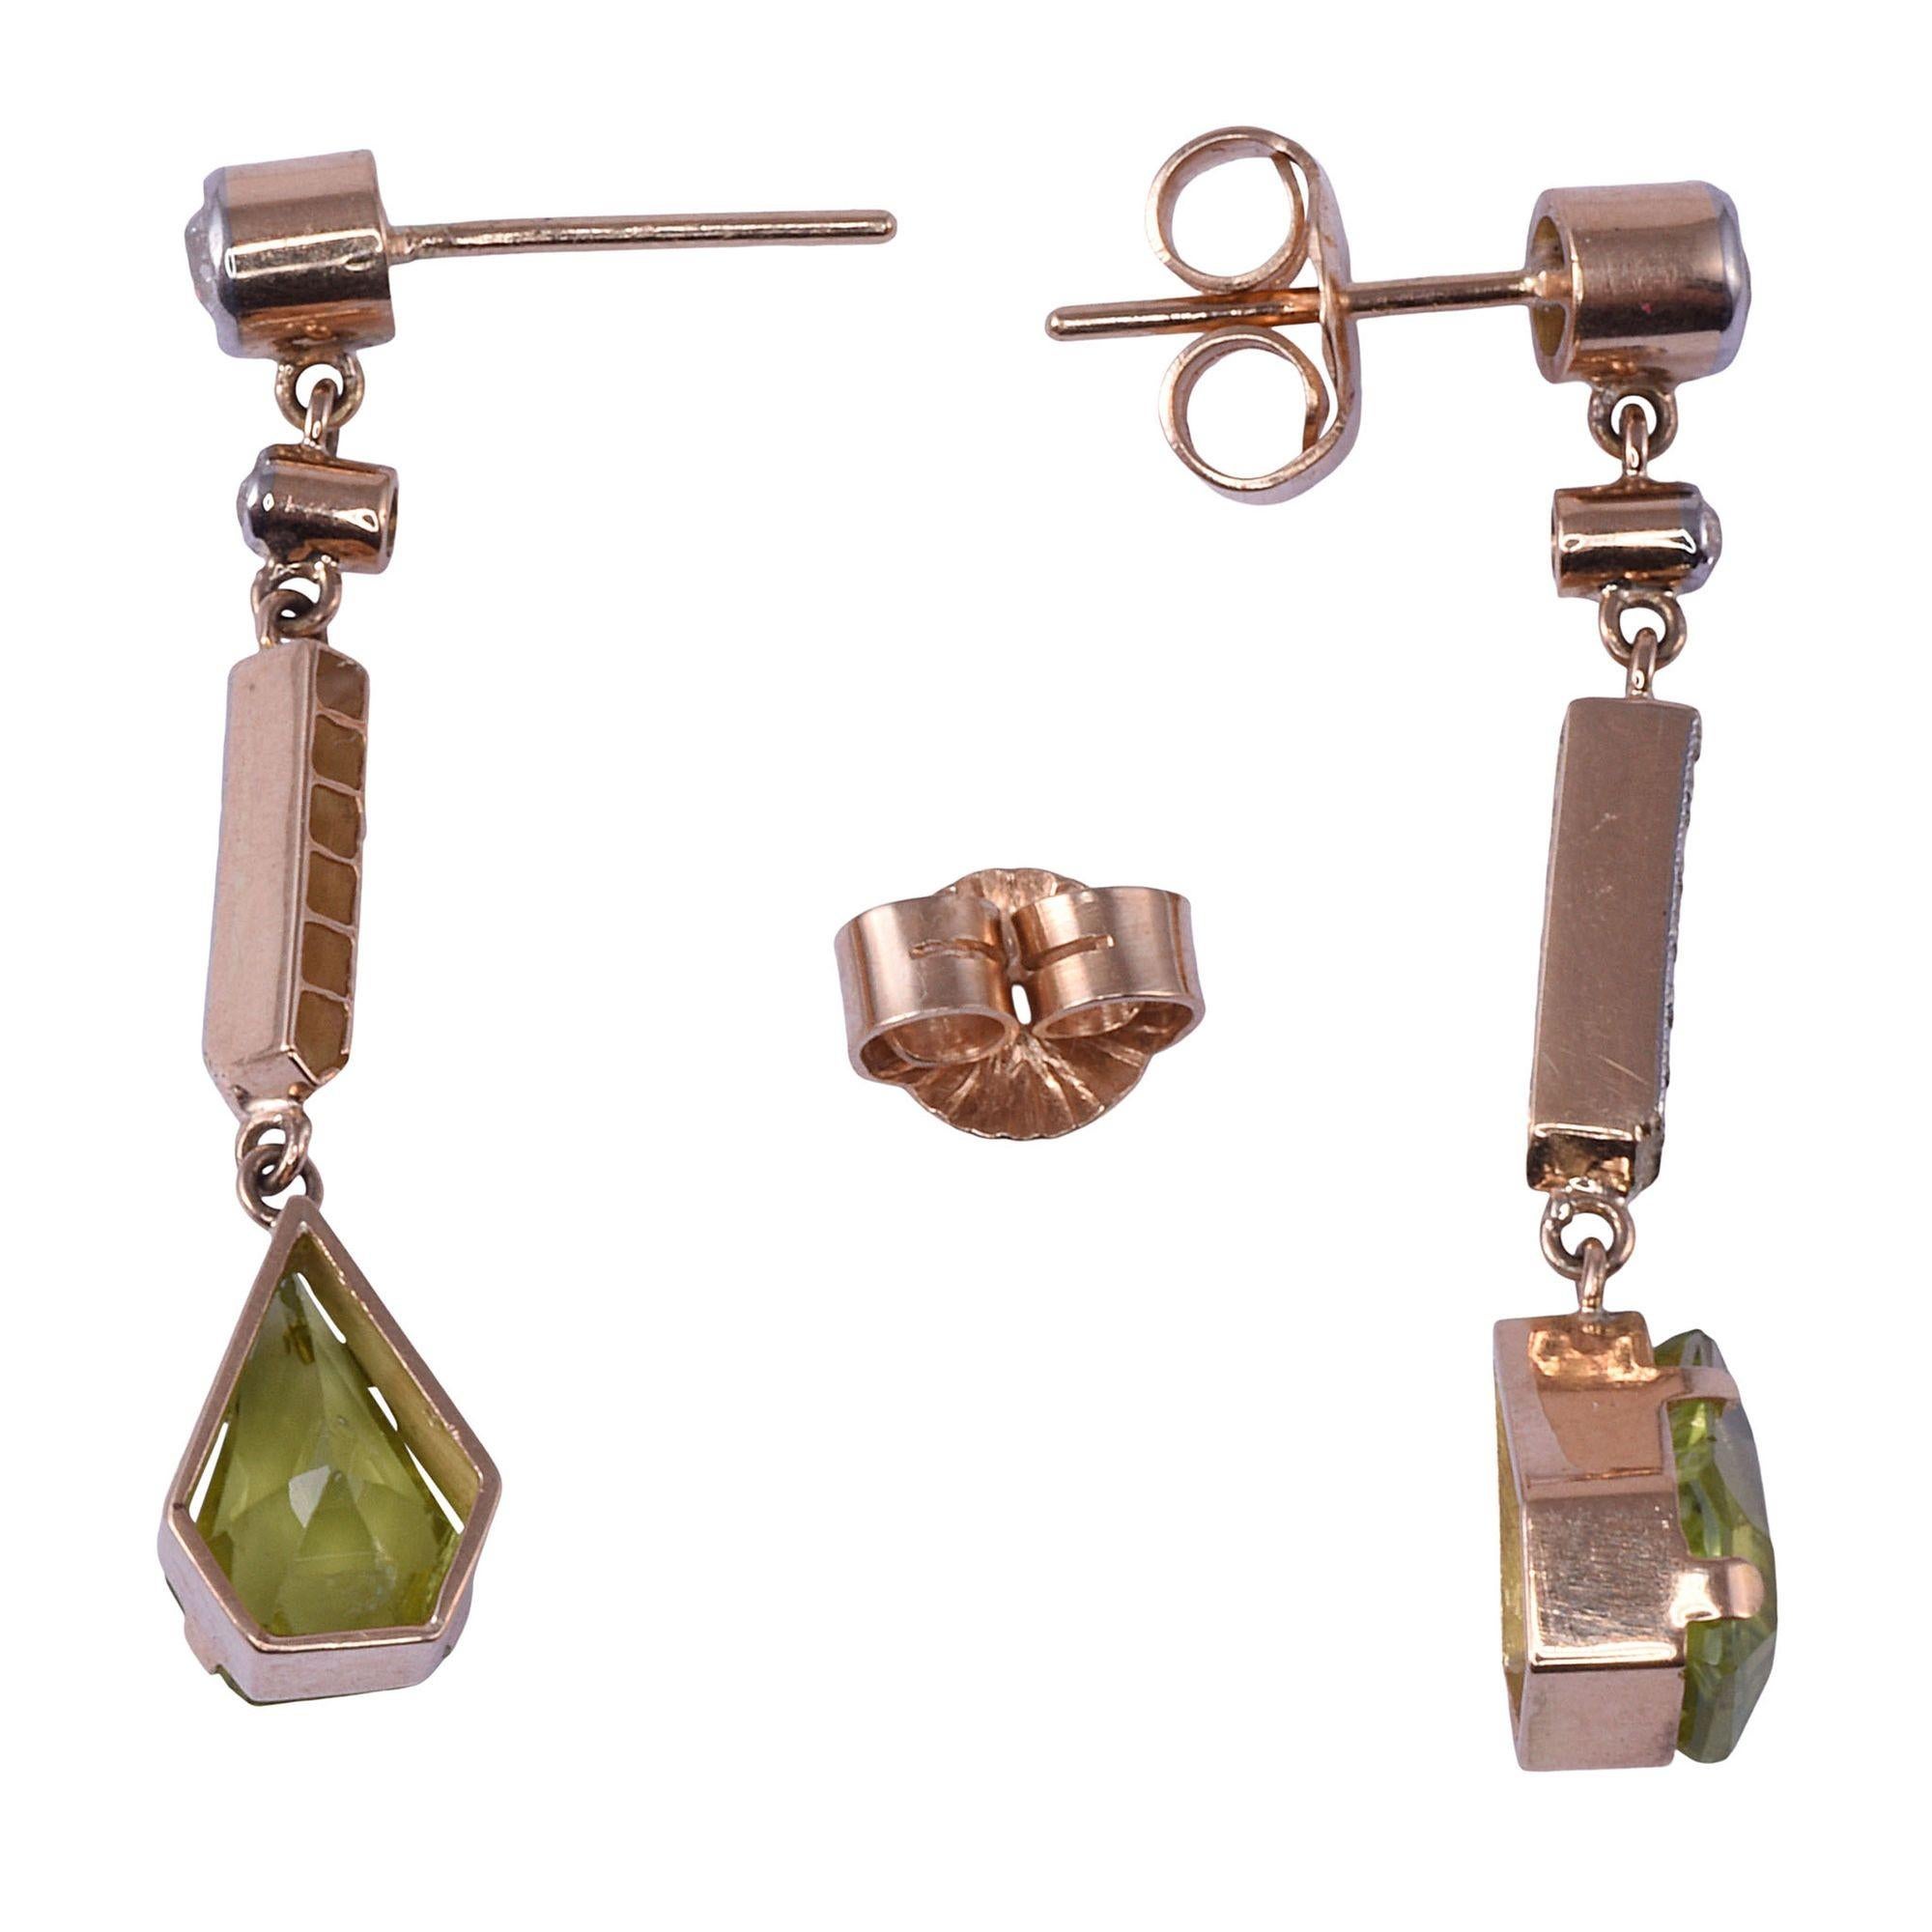 Vintage kite shaped peridot earrings. These 14 karat gold dangle earrings feature kite shaped peridot at 2.90 carat total weight accented with .37 carat total weight of diamonds. The diamonds have VS-SI clarity and H-J color. Please note: these